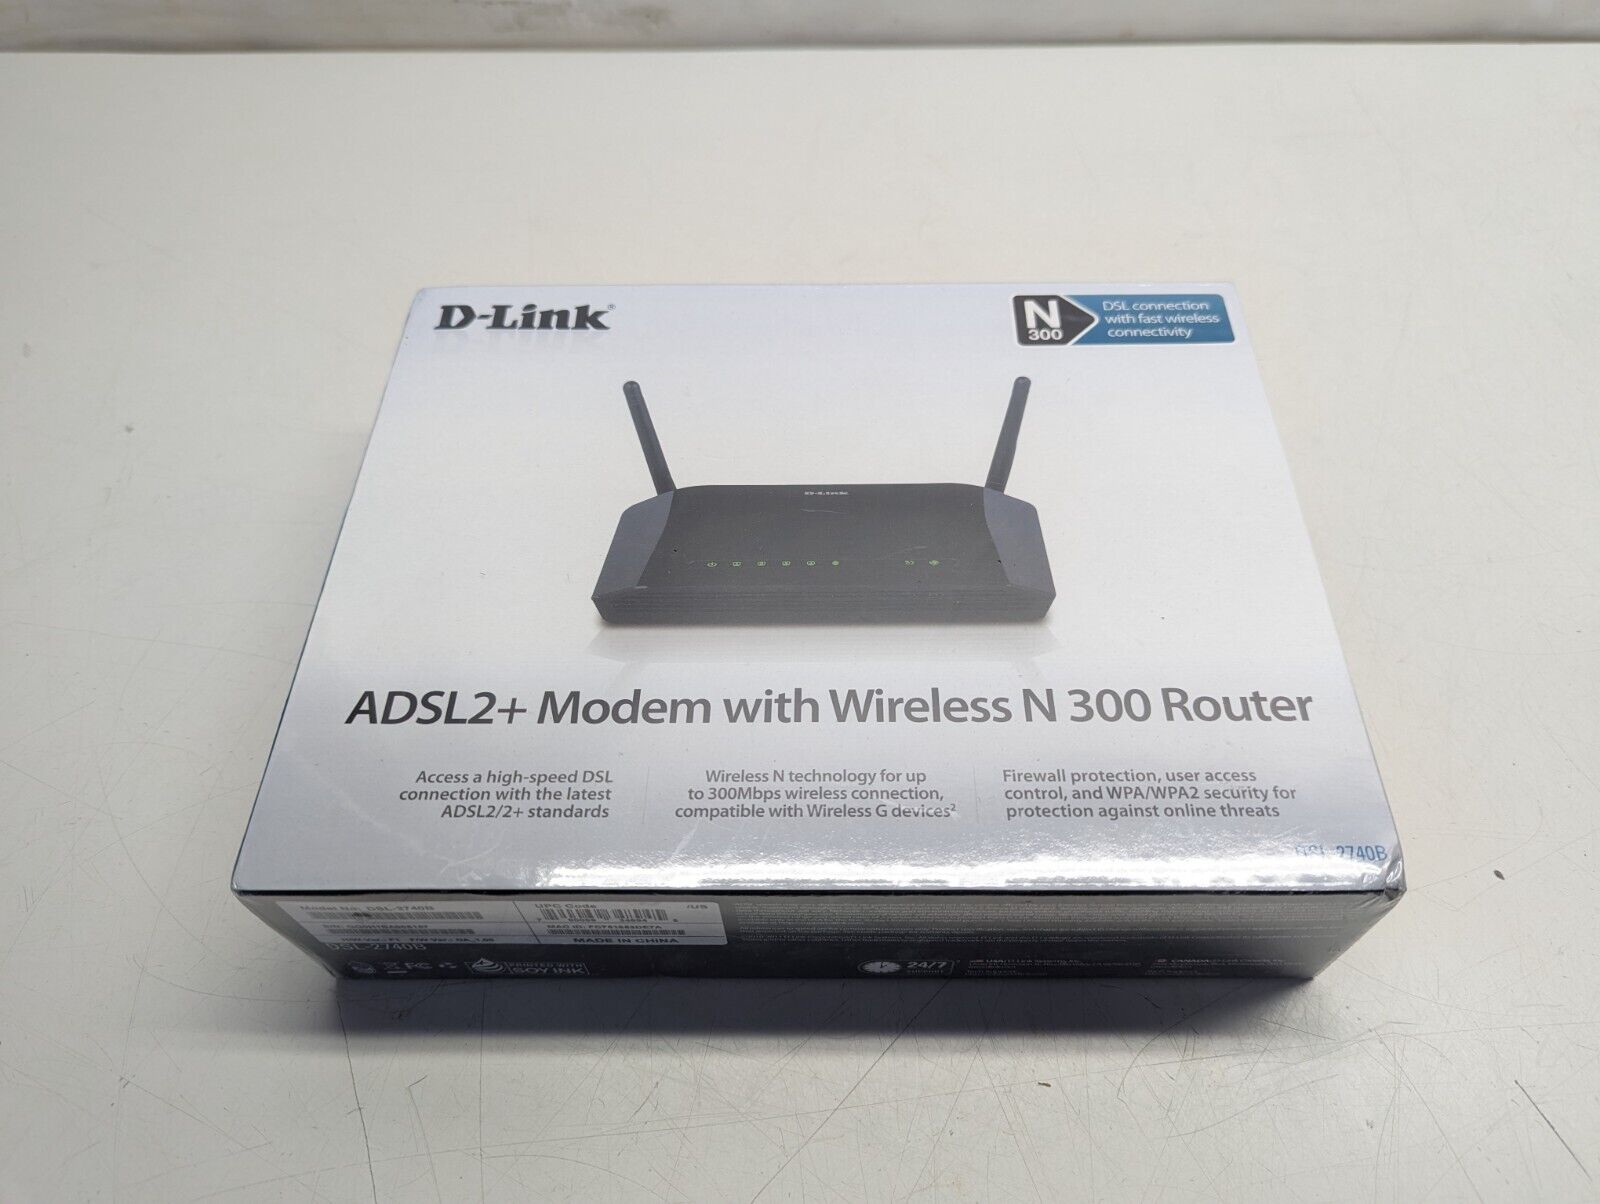 New: D-Link ADSL2+ Modem with Wireless N 300 Router (DSL-2740B)